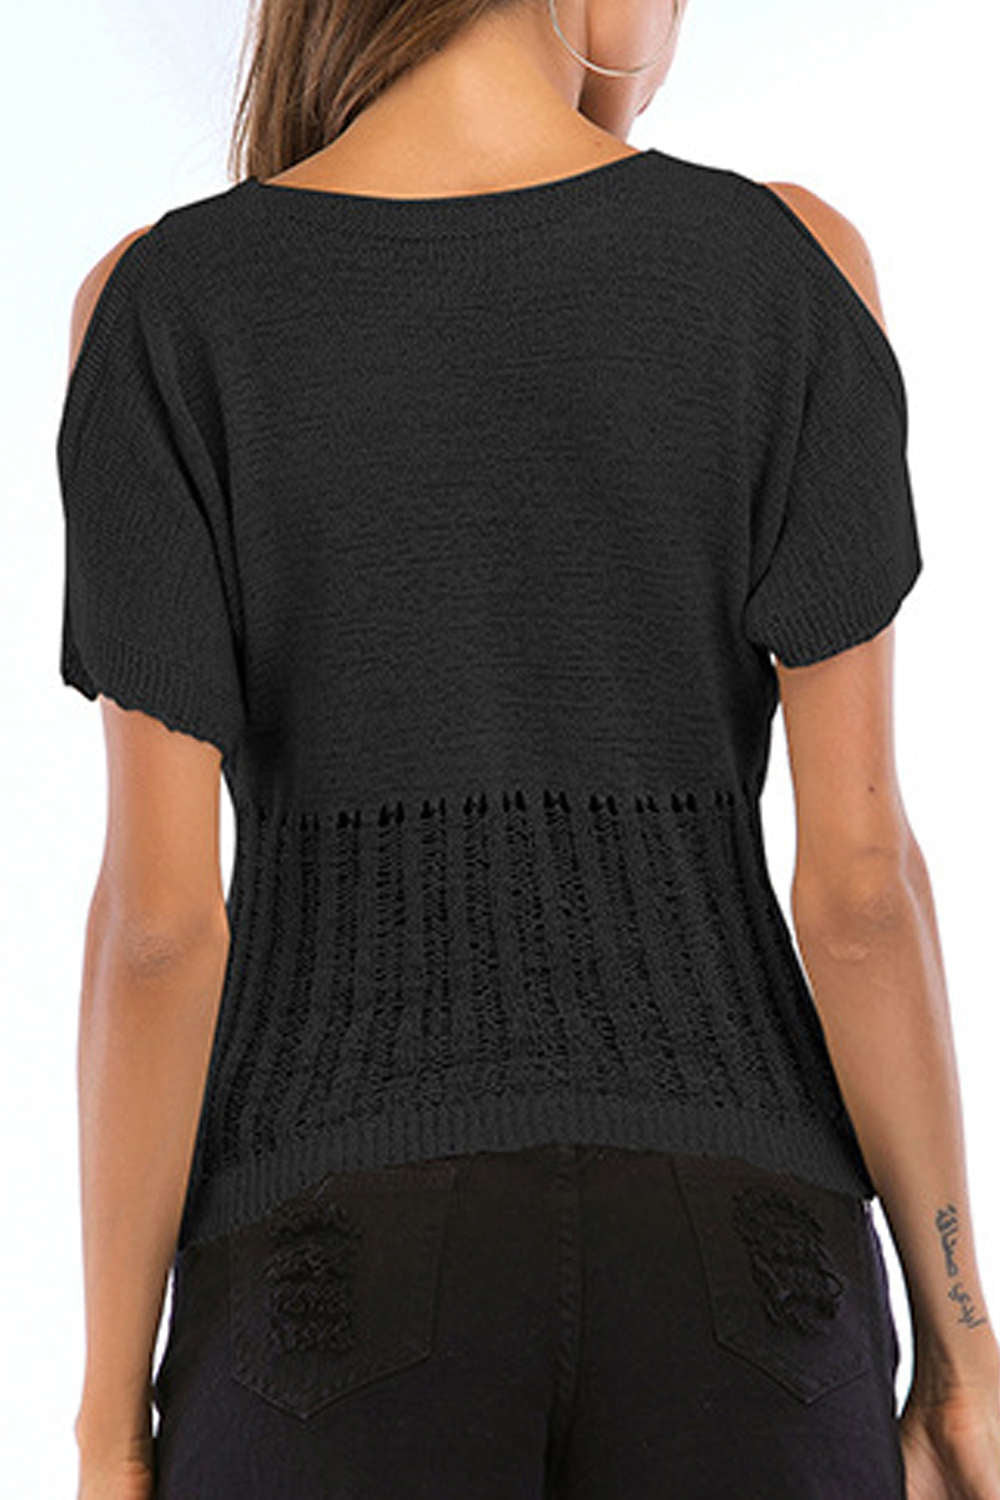 Iyasson Cold shoulder V-neck Hollow-out Knitted Tops